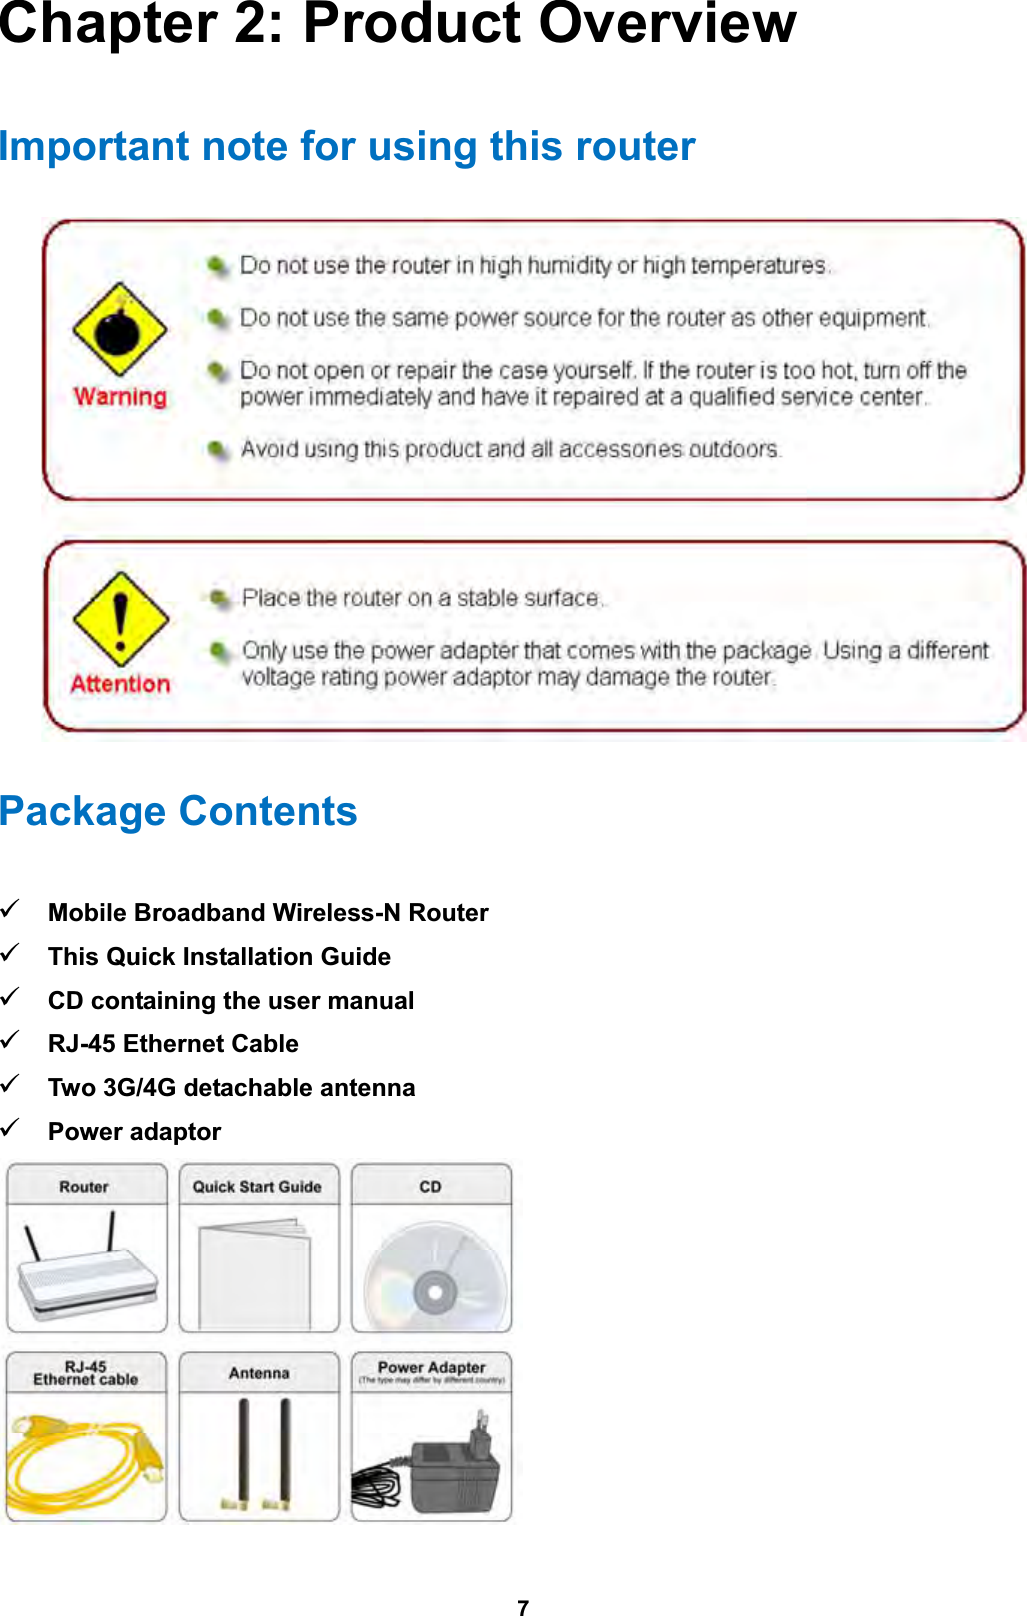  7 Chapter 2: Product Overview Important note for using this router   Package Contents  Mobile Broadband Wireless-N Router  This Quick Installation Guide  CD containing the user manual   RJ-45 Ethernet Cable  Two 3G/4G detachable antenna  Power adaptor   